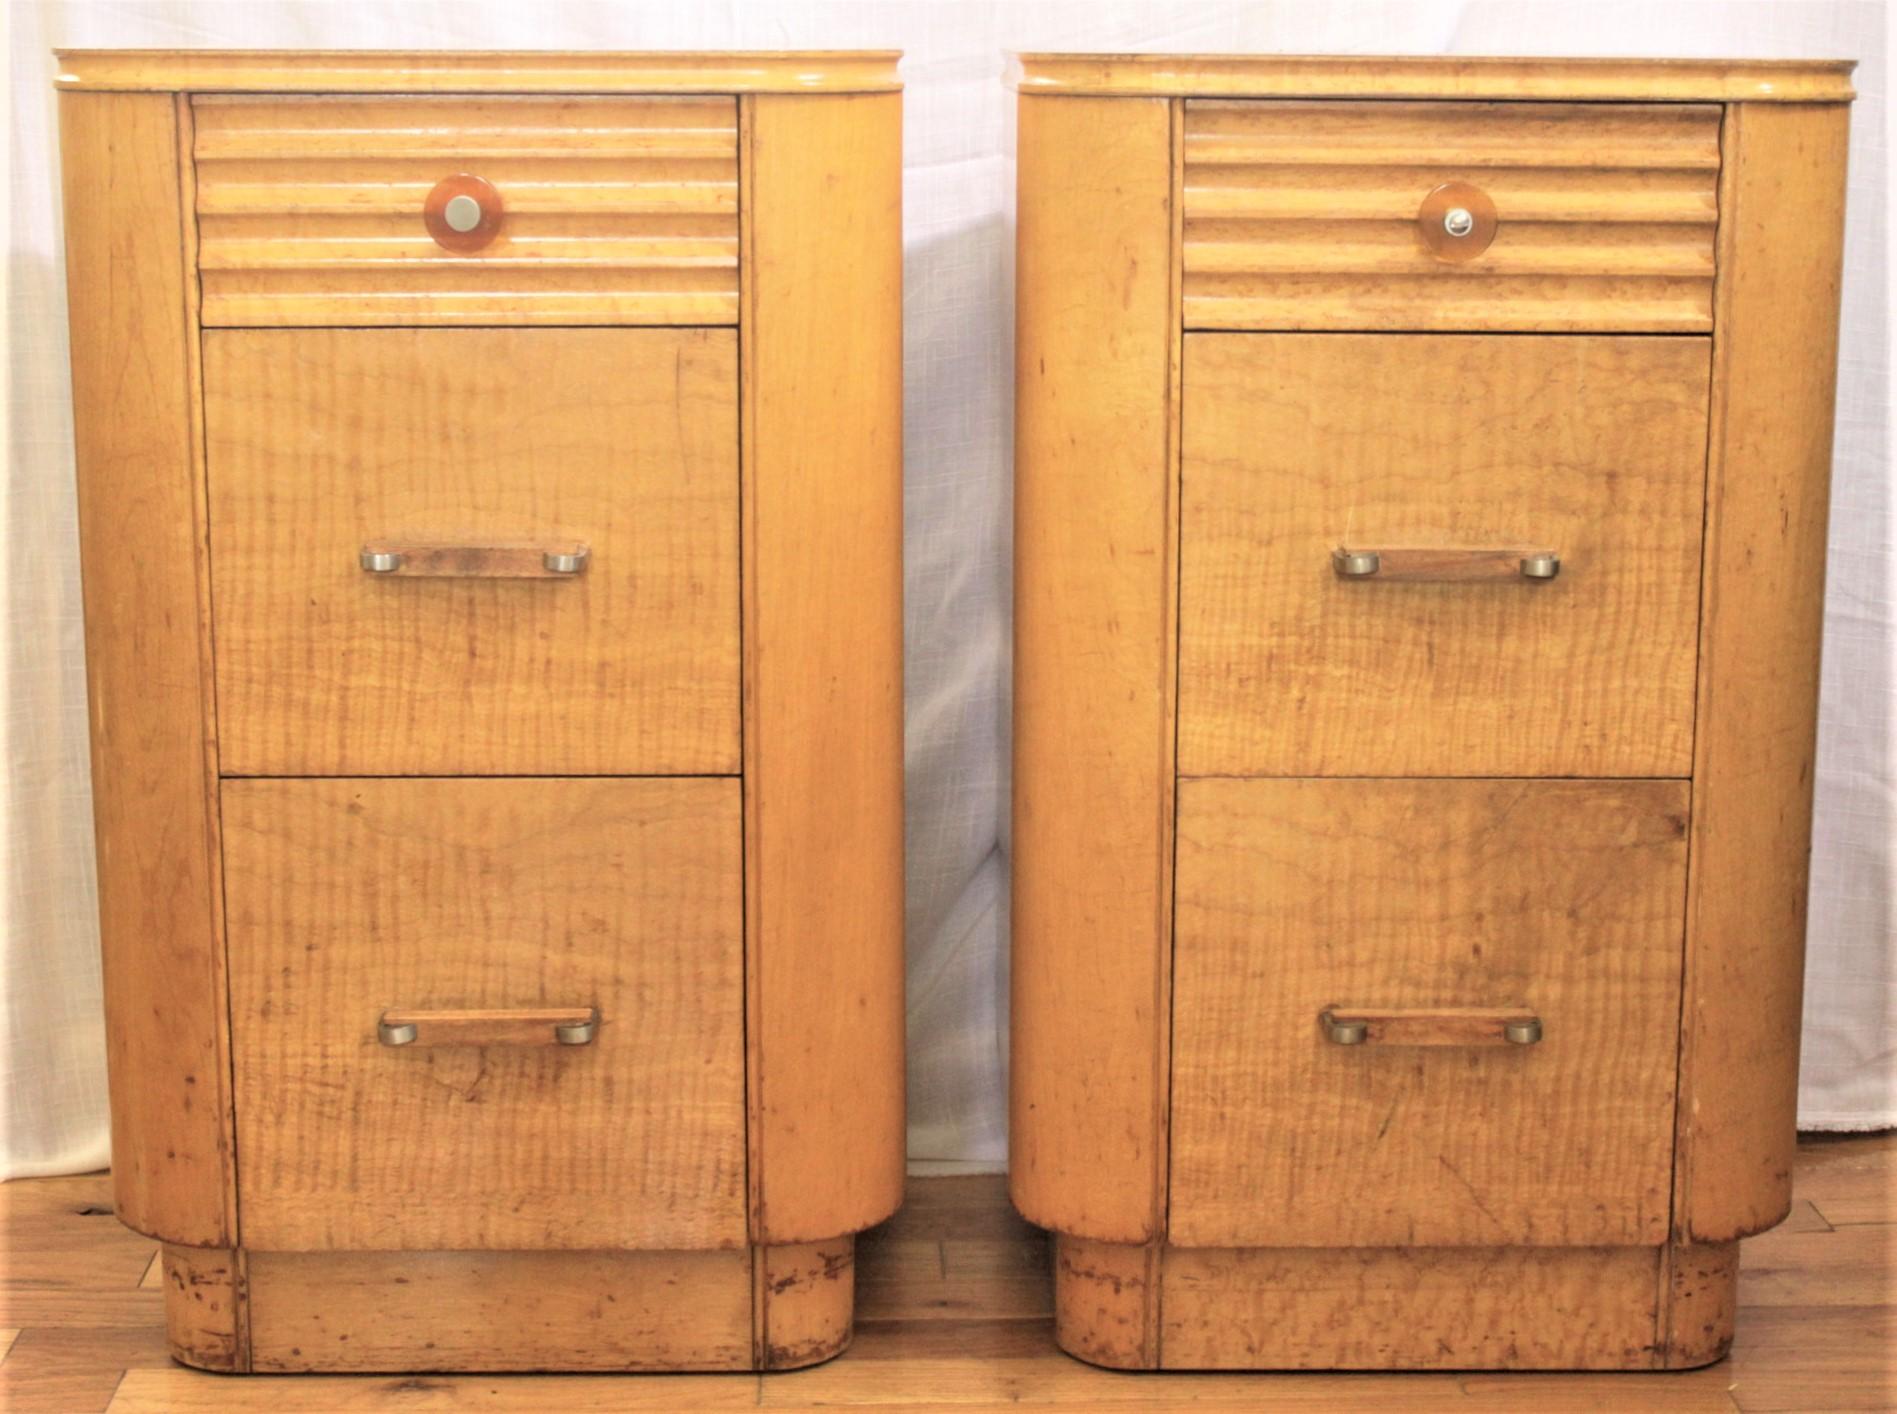 This matched pair of commodes are unsigned, but presumed to have been made in the United States in approximately 1925 in the period Art Deco style. These nightstands or cabinets have a streamlined shape and accenting top drawer and covered in a